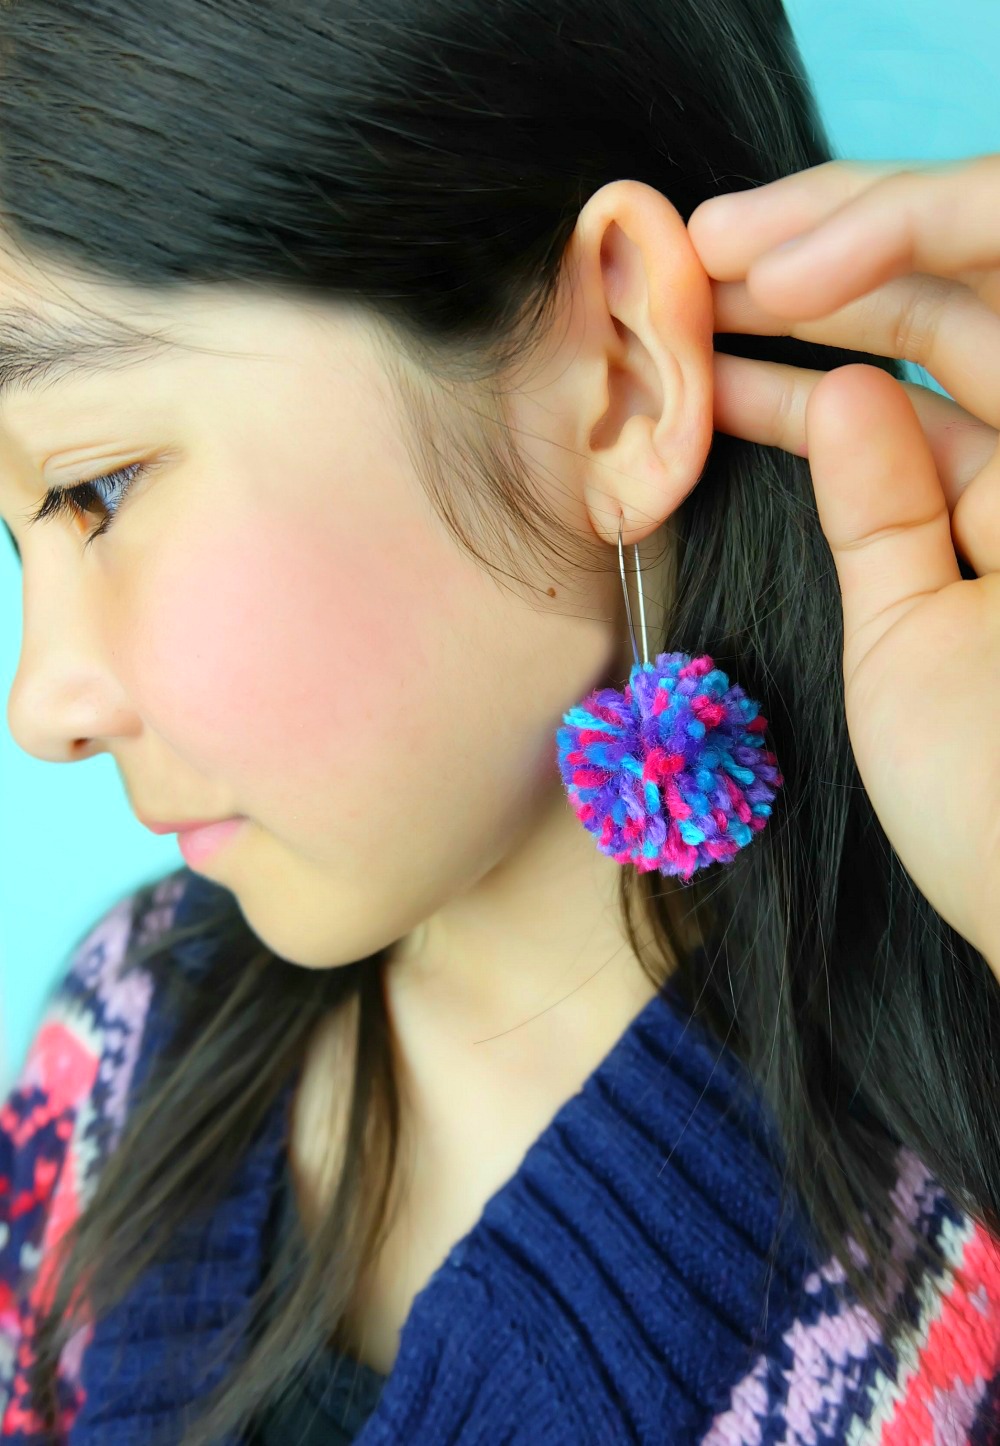 Learn how to make DIY Pom Pom Earrings in minutes with this quick and easy tutorial! Make an adorable pair of earrings to match any outfit! Also learn how to make a DIY pom pom maker in any size using a piece of cardboard! This would make an adorable handmade gift for teens or tweens! #DIY #Craft #pompoms #Earrings